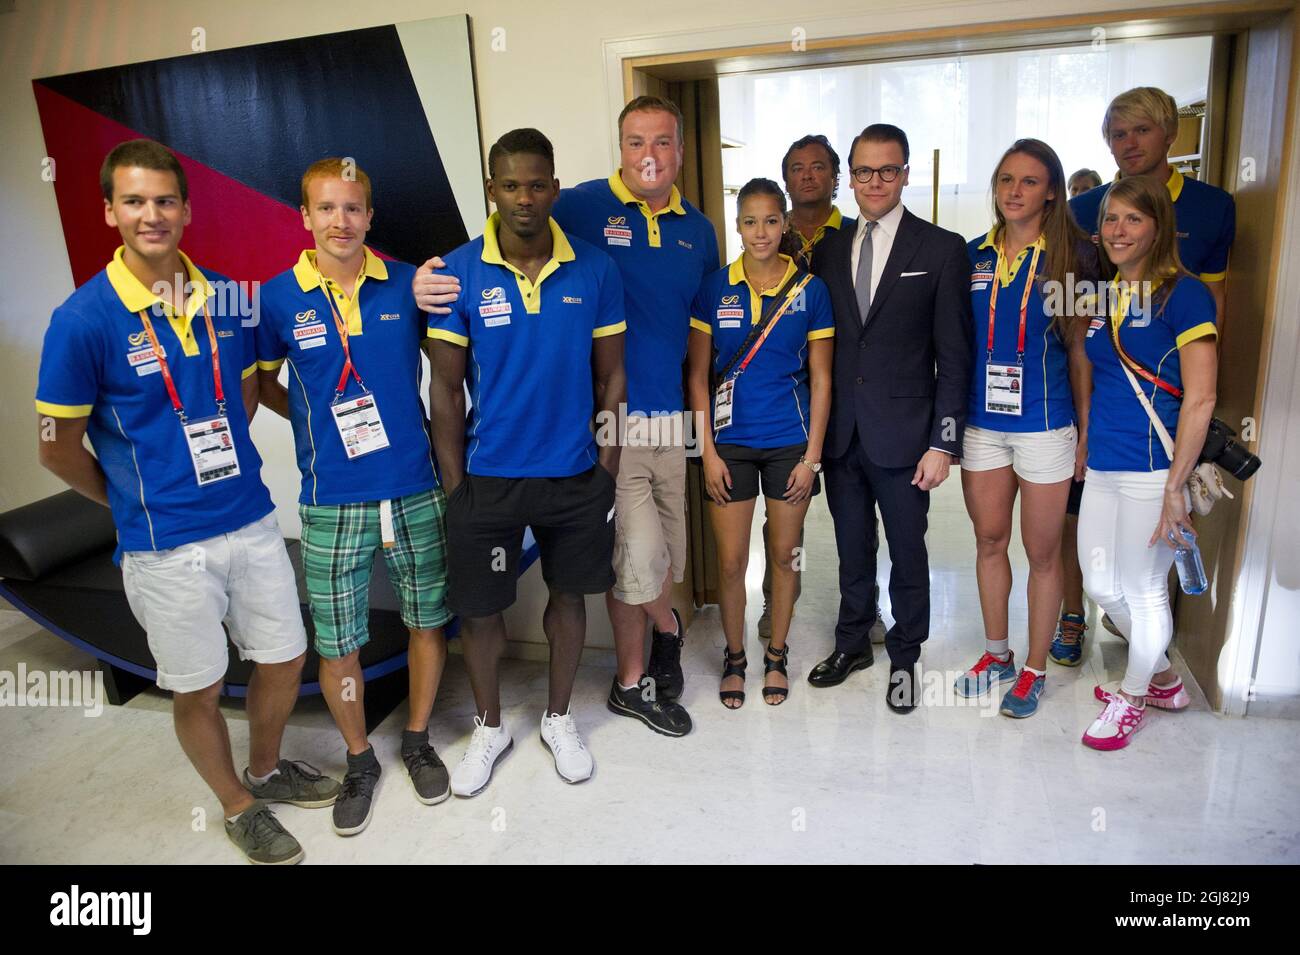 MOSKVA 2013-08-14 Prince Daniel is seen with Swedish athletes during a reception the Swedish Embassy in Moscow, Russia, August 14, 2013. Foto: Erik Martensson / SCANPIX / Kod 10400  Stock Photo